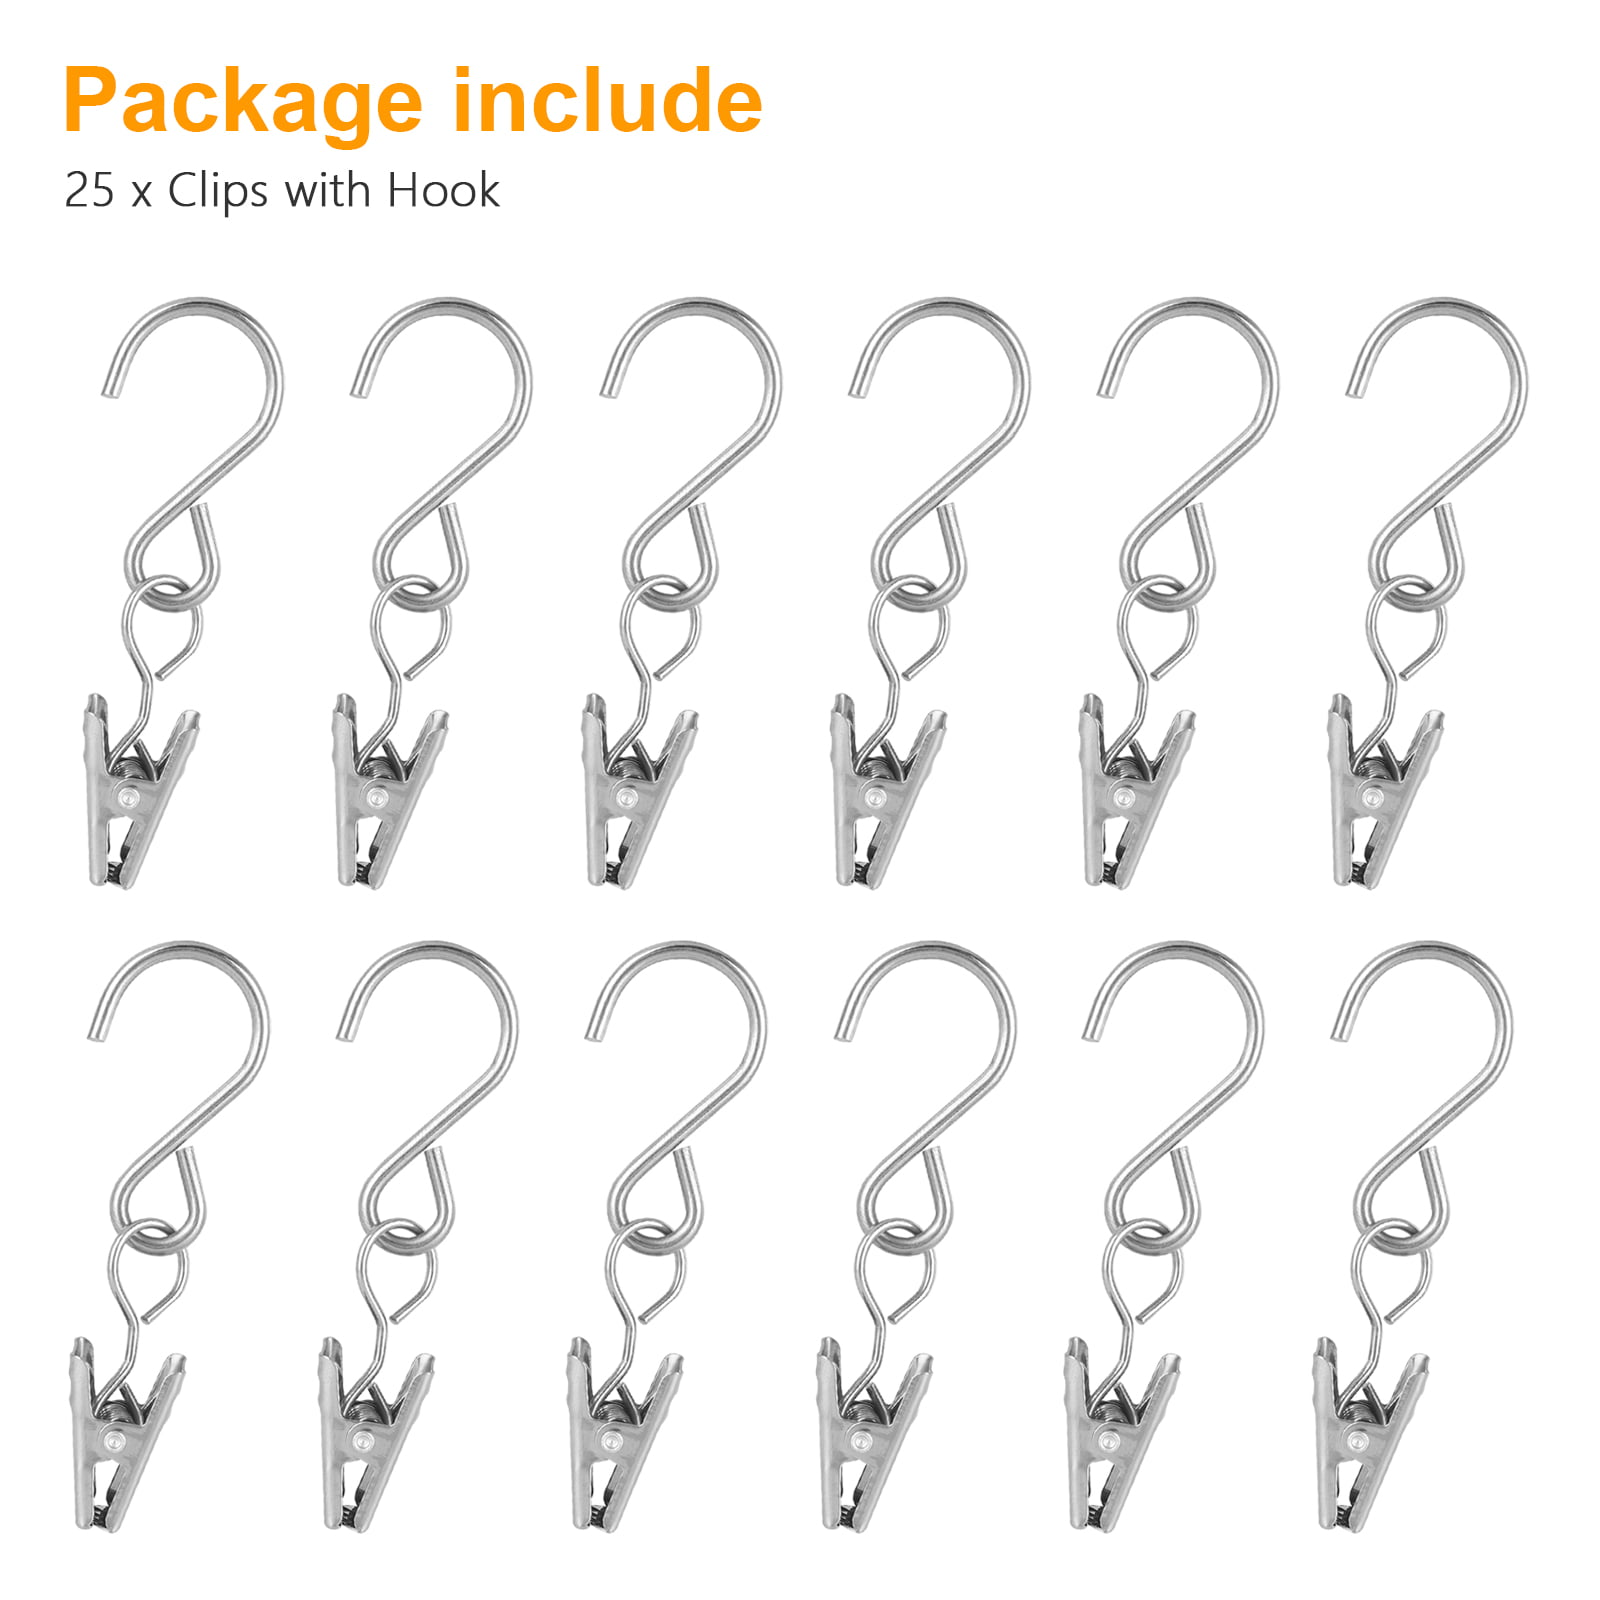 vshougou 32pcs Curtain Clips with S Hooks,Hanger Clips,Tapestry Hangers